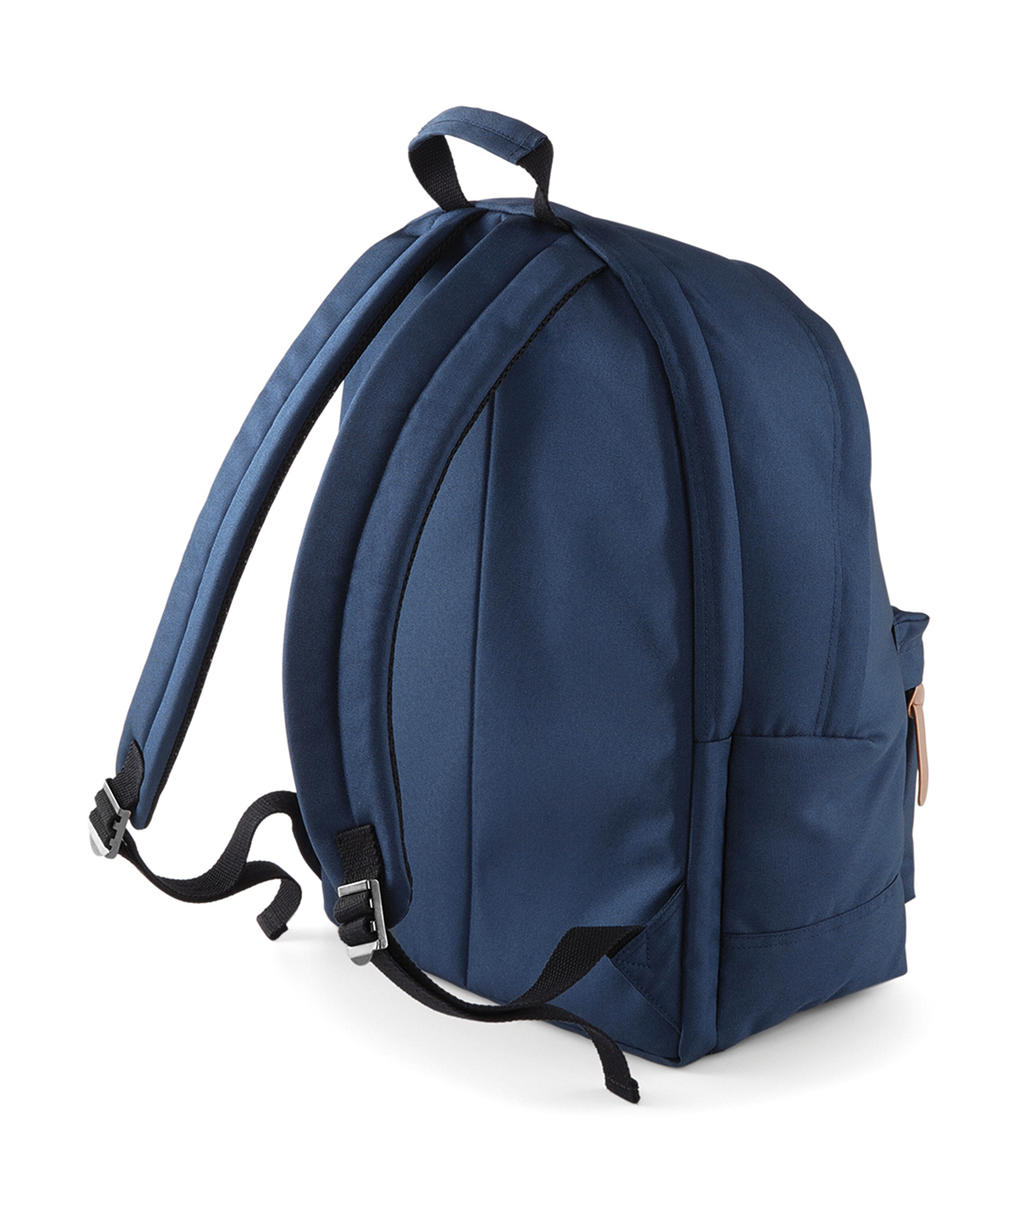  Campus Laptop Backpack in Farbe Black